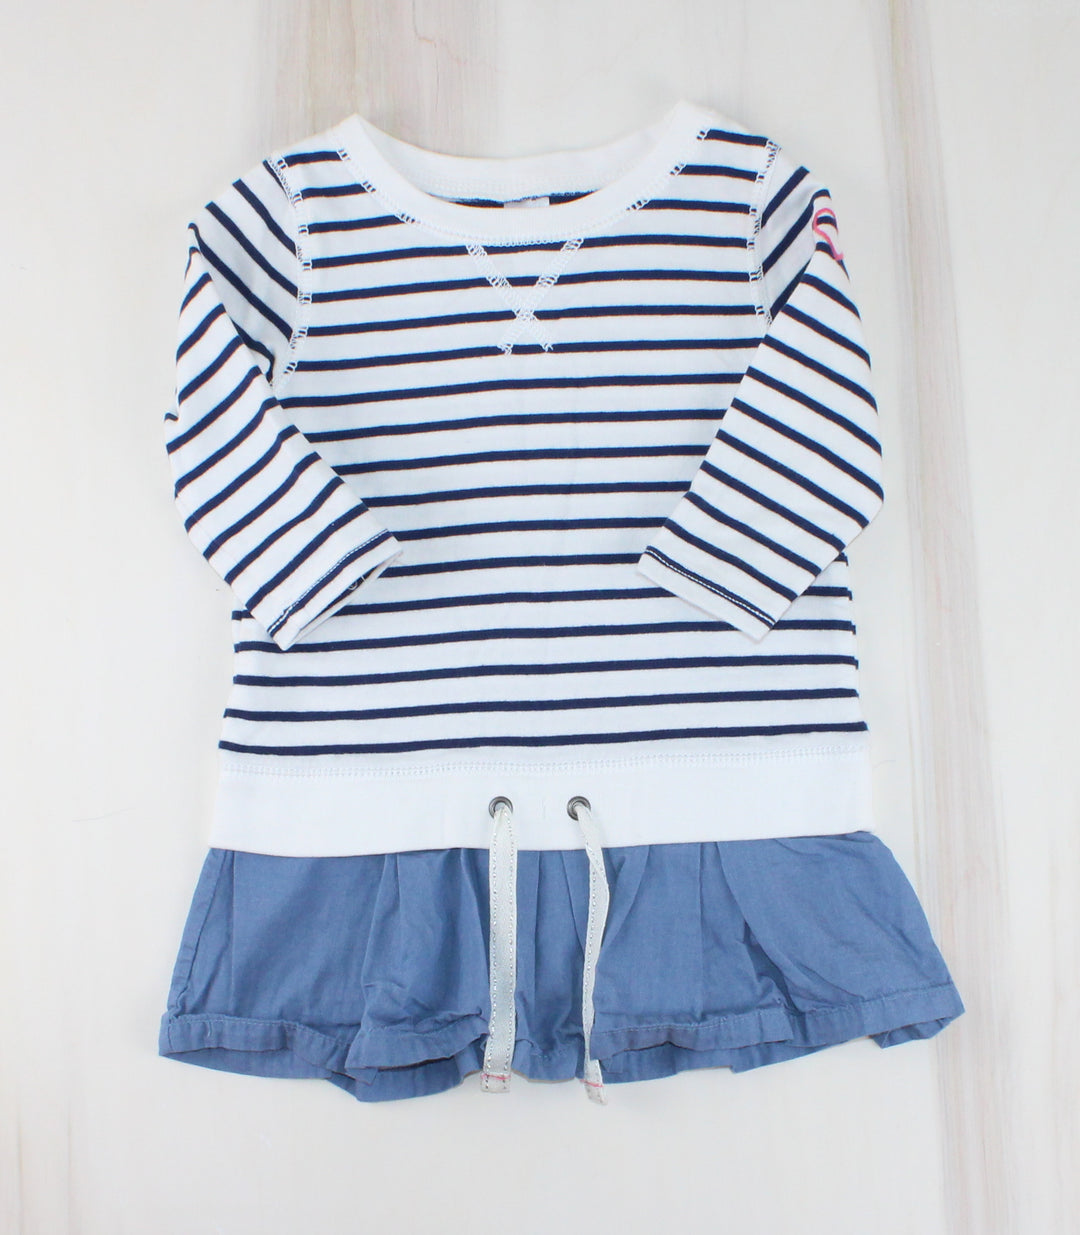 CARTERS STRIPED LONG TOP WITH DENIM BOTTOM 4Y EUC